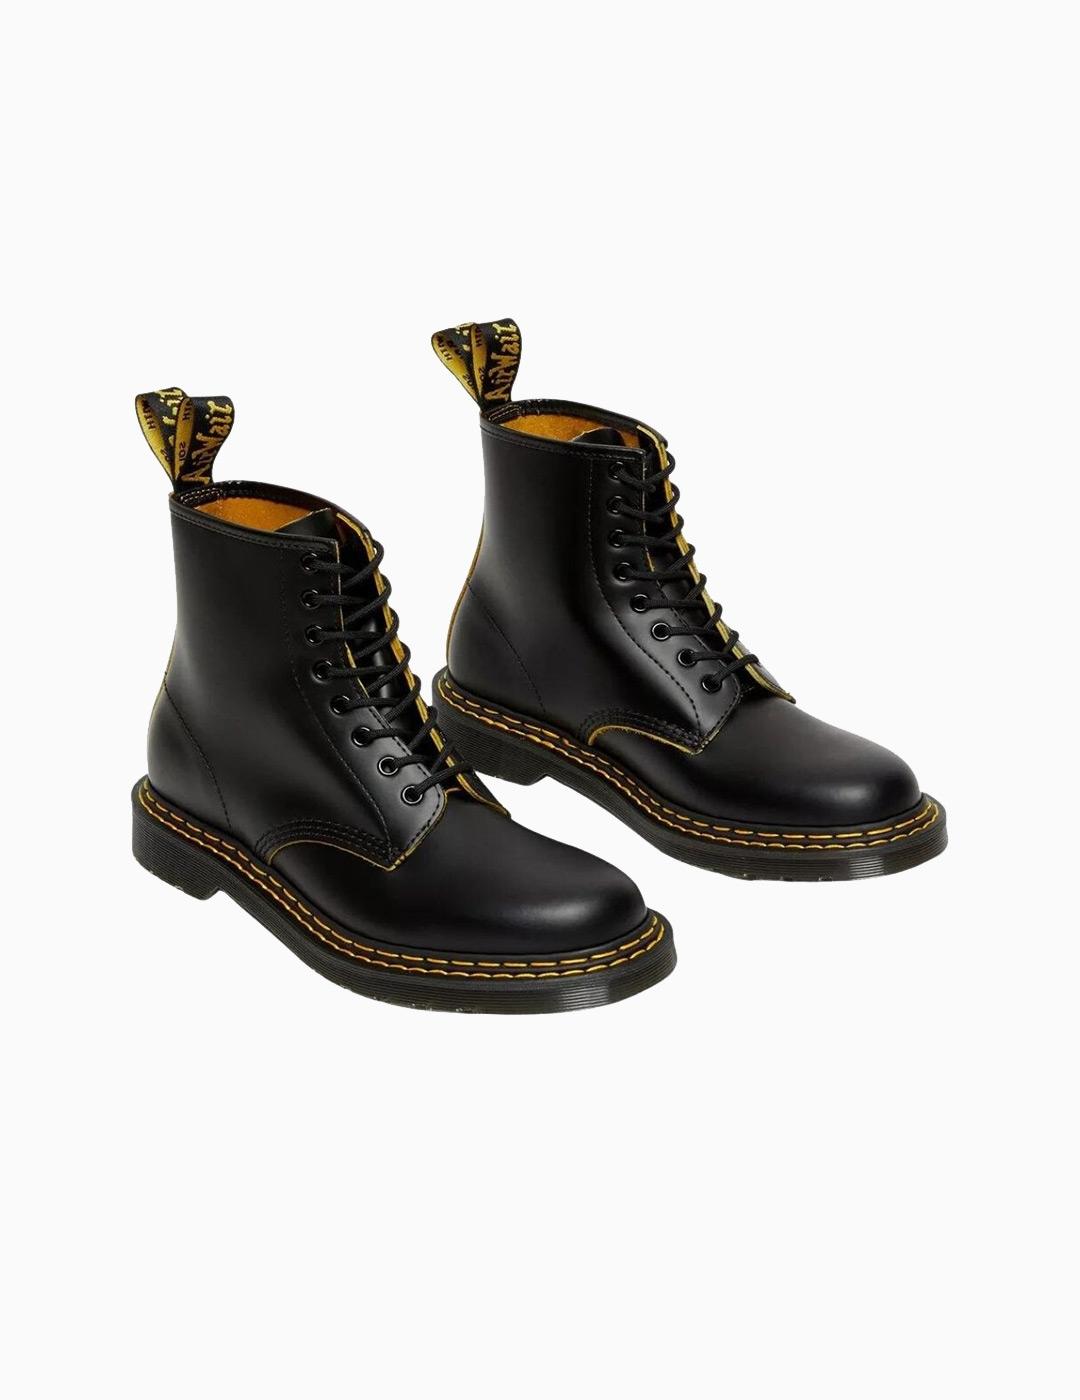 BOTAS DR. MARTENS 1460 DS BLACK + YELLOW SMOOTH SL